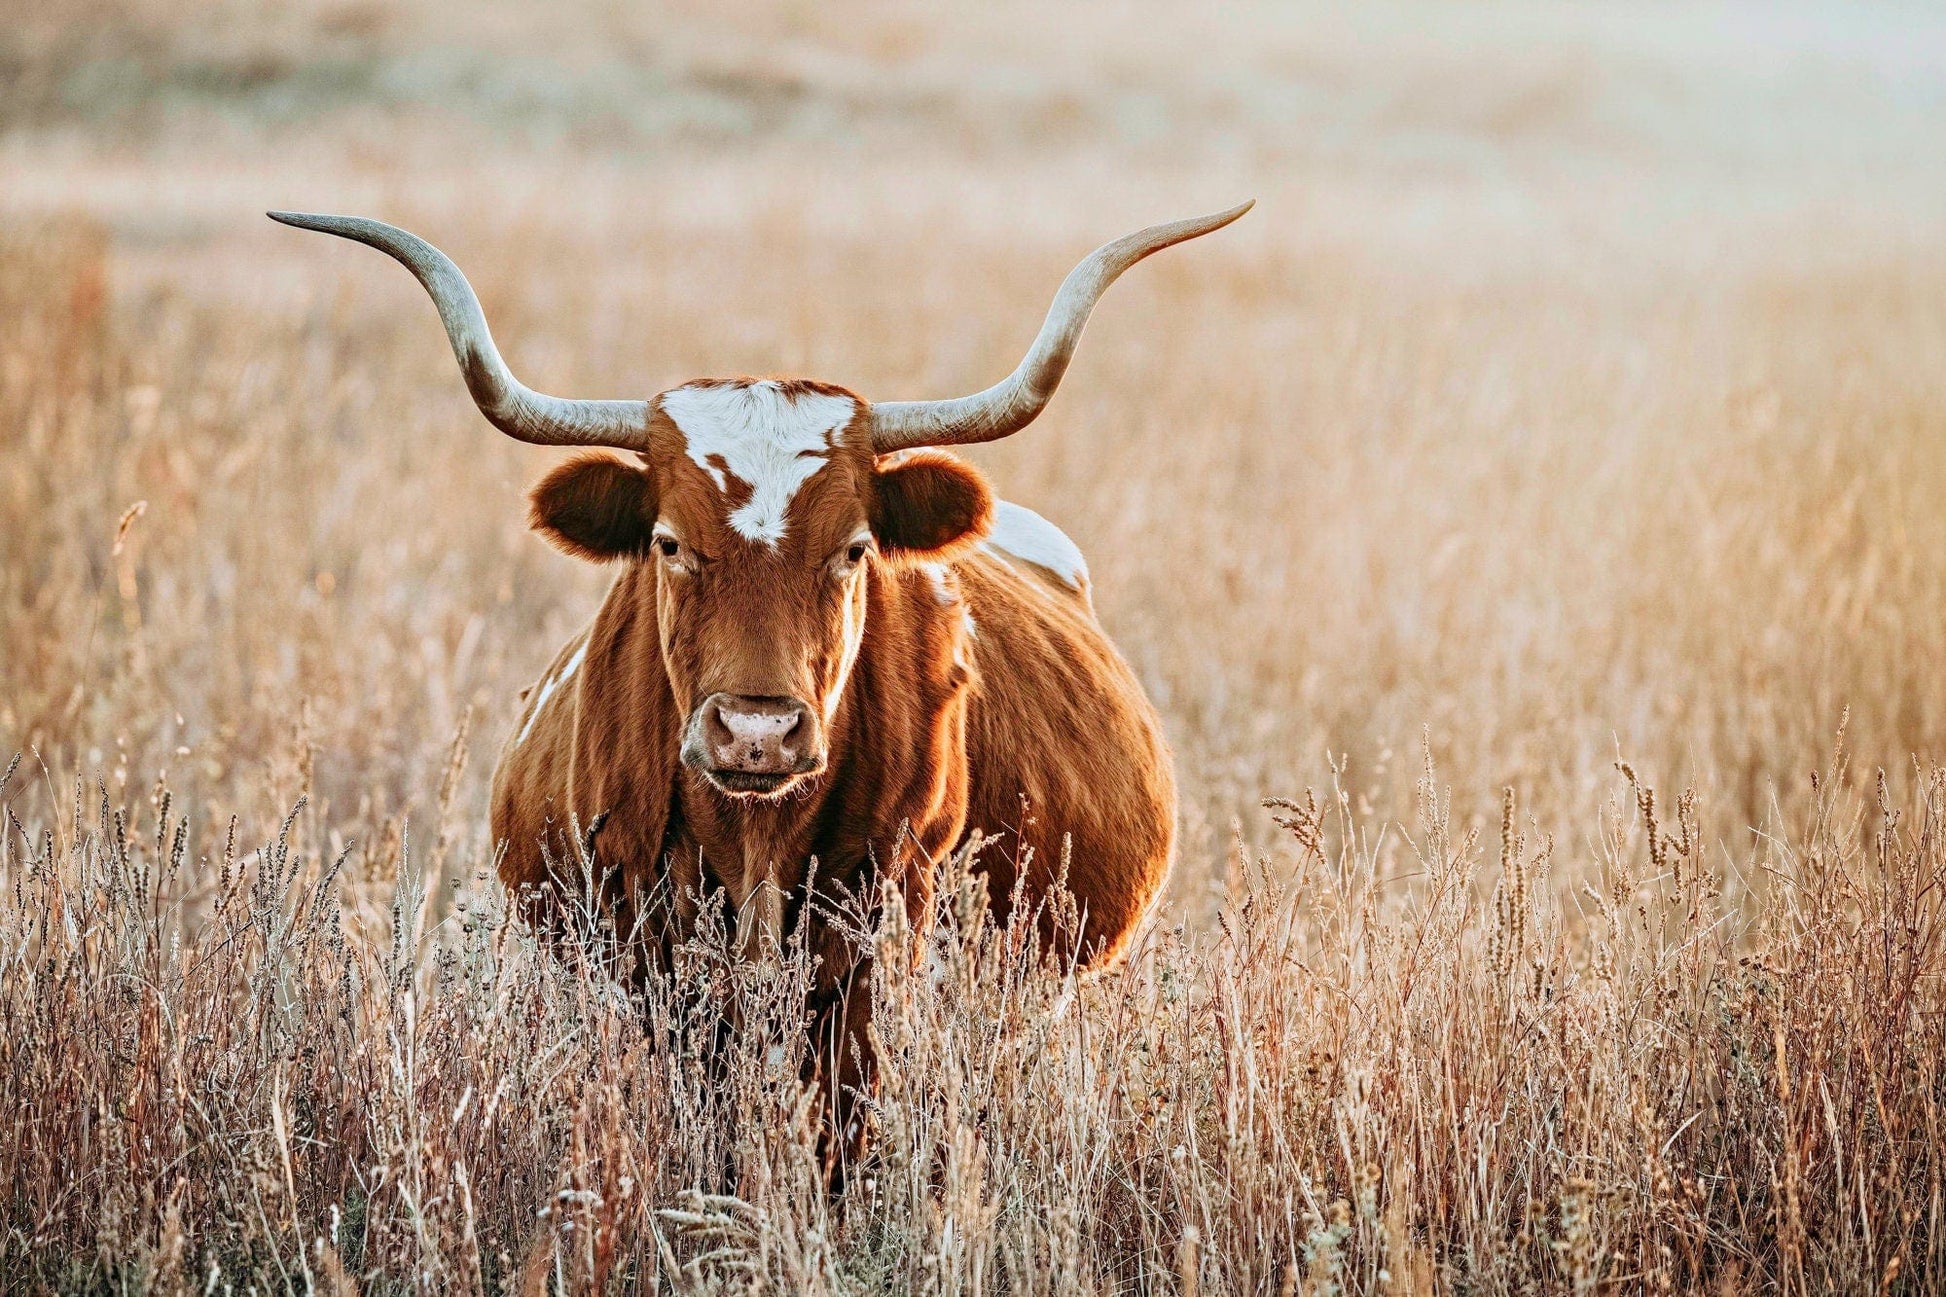 Texas Longhorn Cow in Tall Grass Canvas Art Paper Photo Print / 12 x 18 Inches Wall Art Teri James Photography